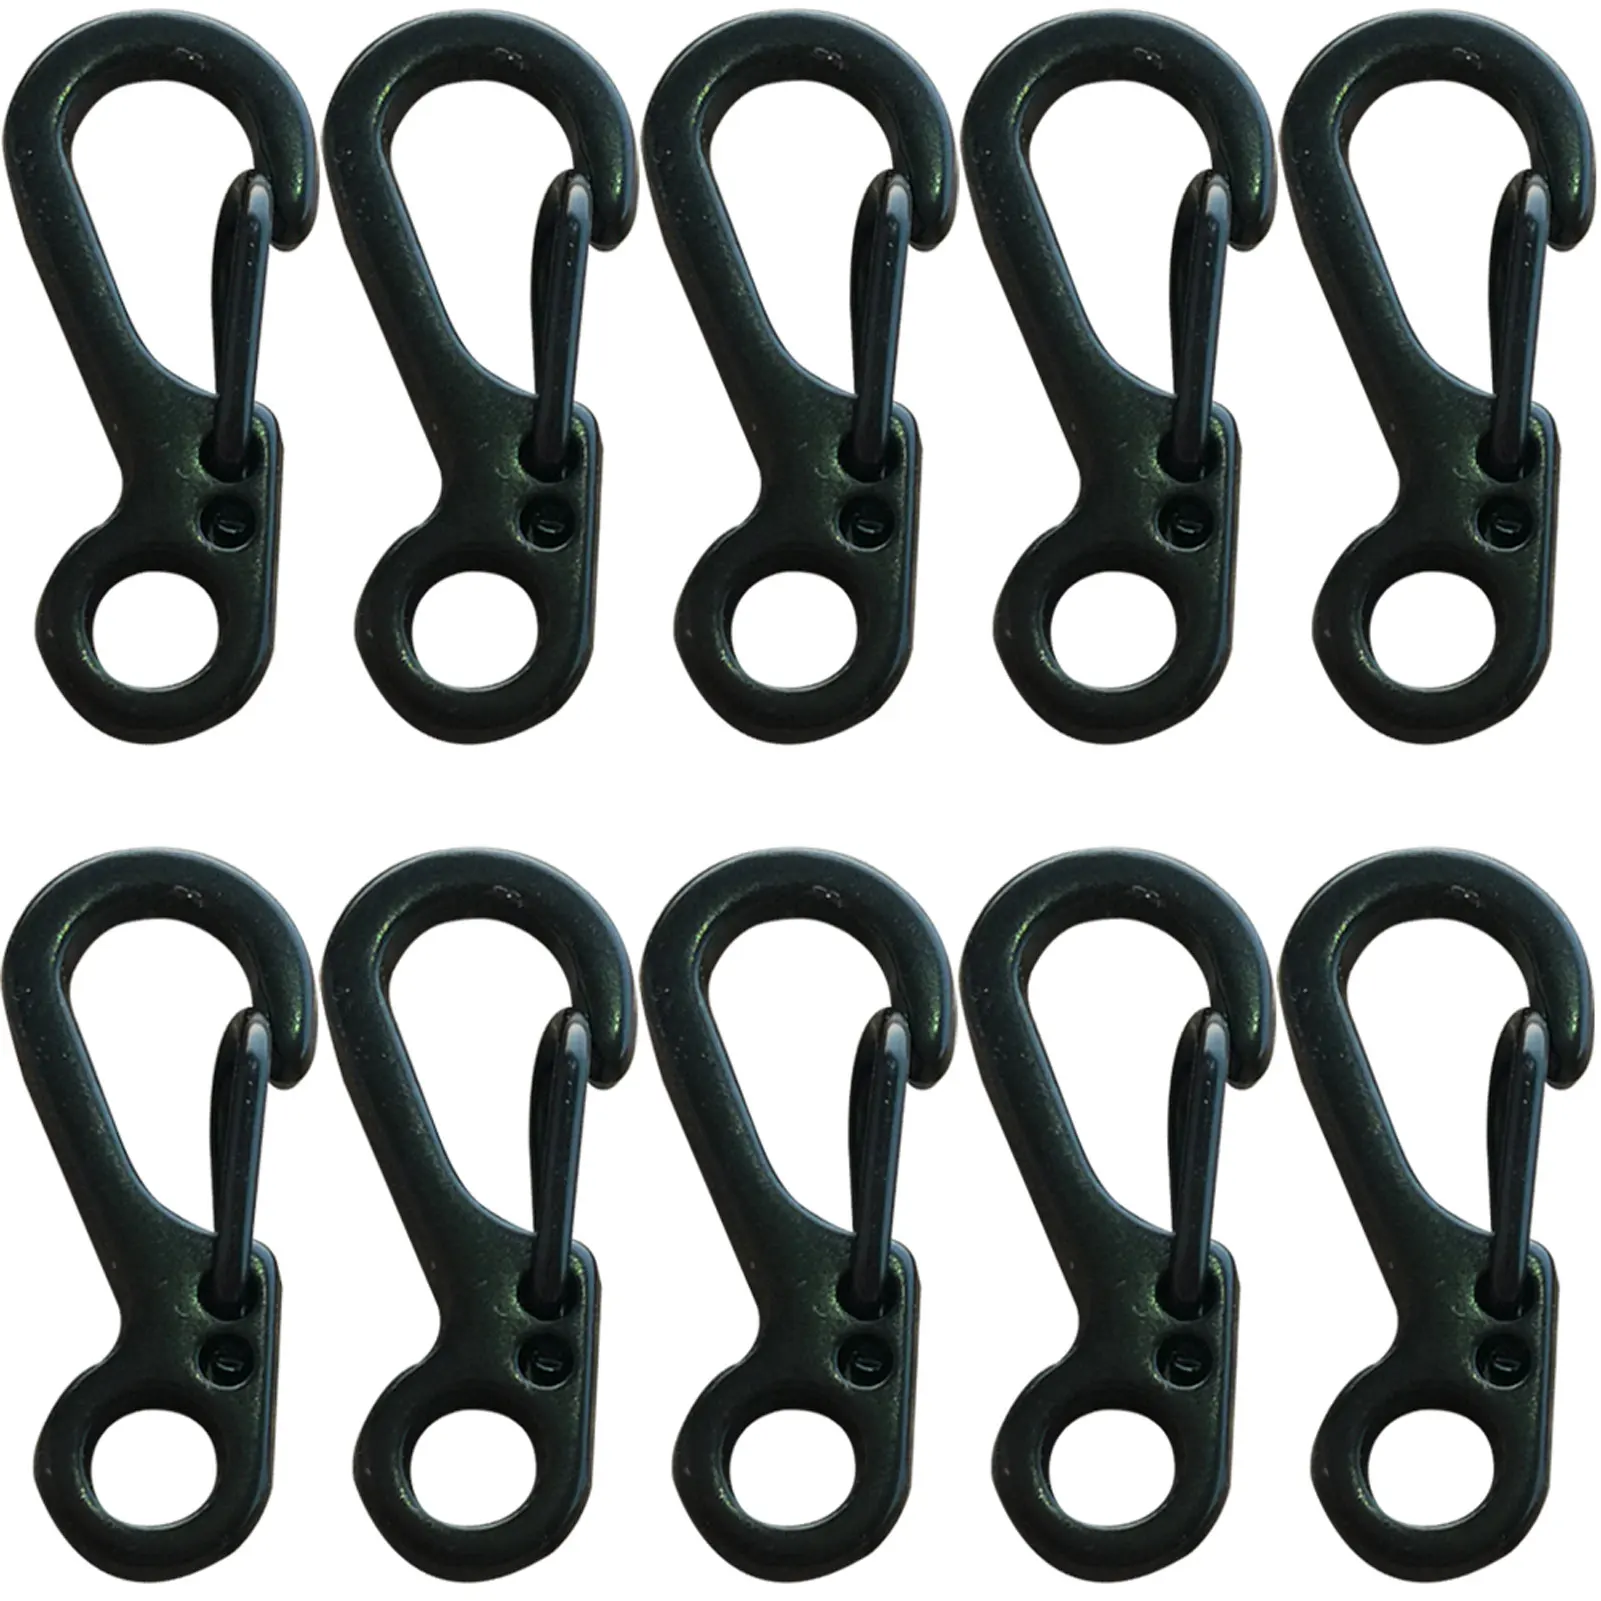 

10pcs Mountaineering Outdoor Carabiner Hook Durable Aluminum Alloy Snap Mini Keychain Camping Spring Clip Heavy Duty Buckle